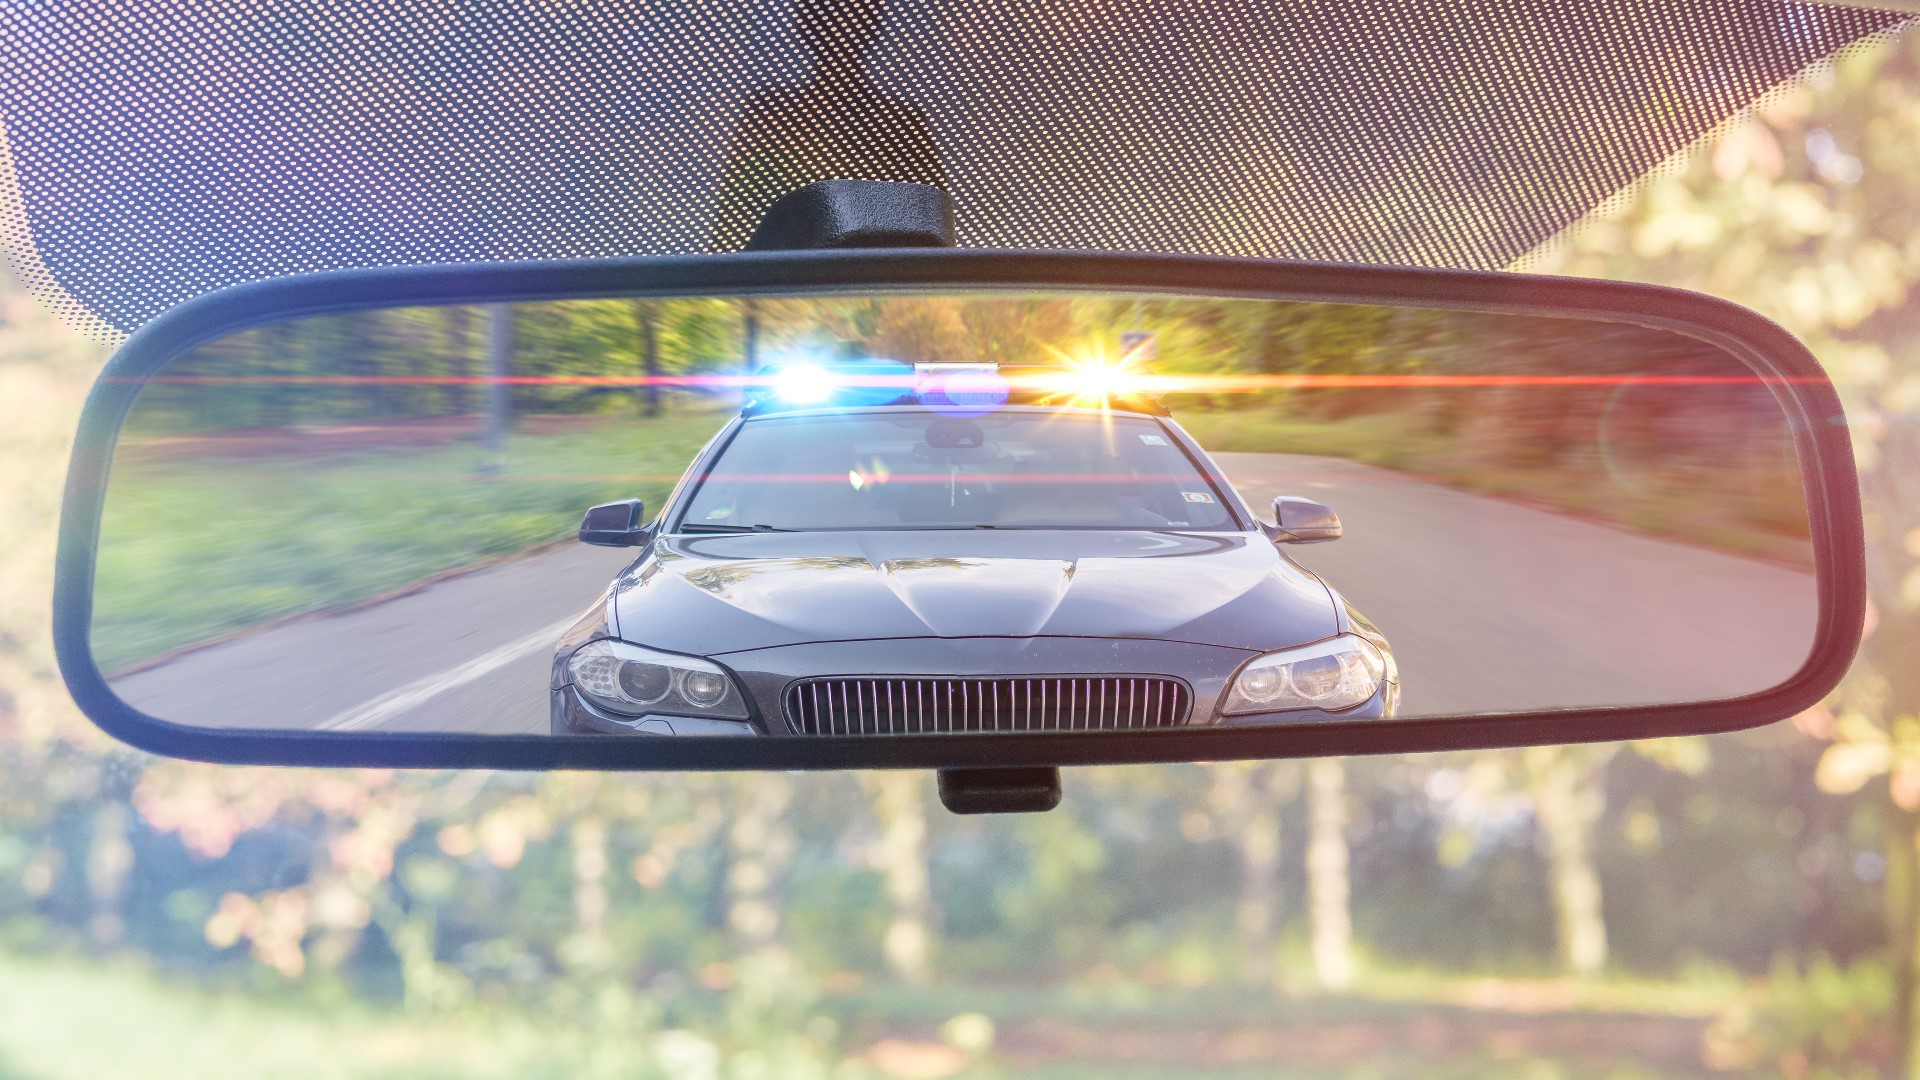 A bill sponsored by lawmakers from both parties would give police the authority to chase after a suspect whenever the officer has “reasonable suspicion."